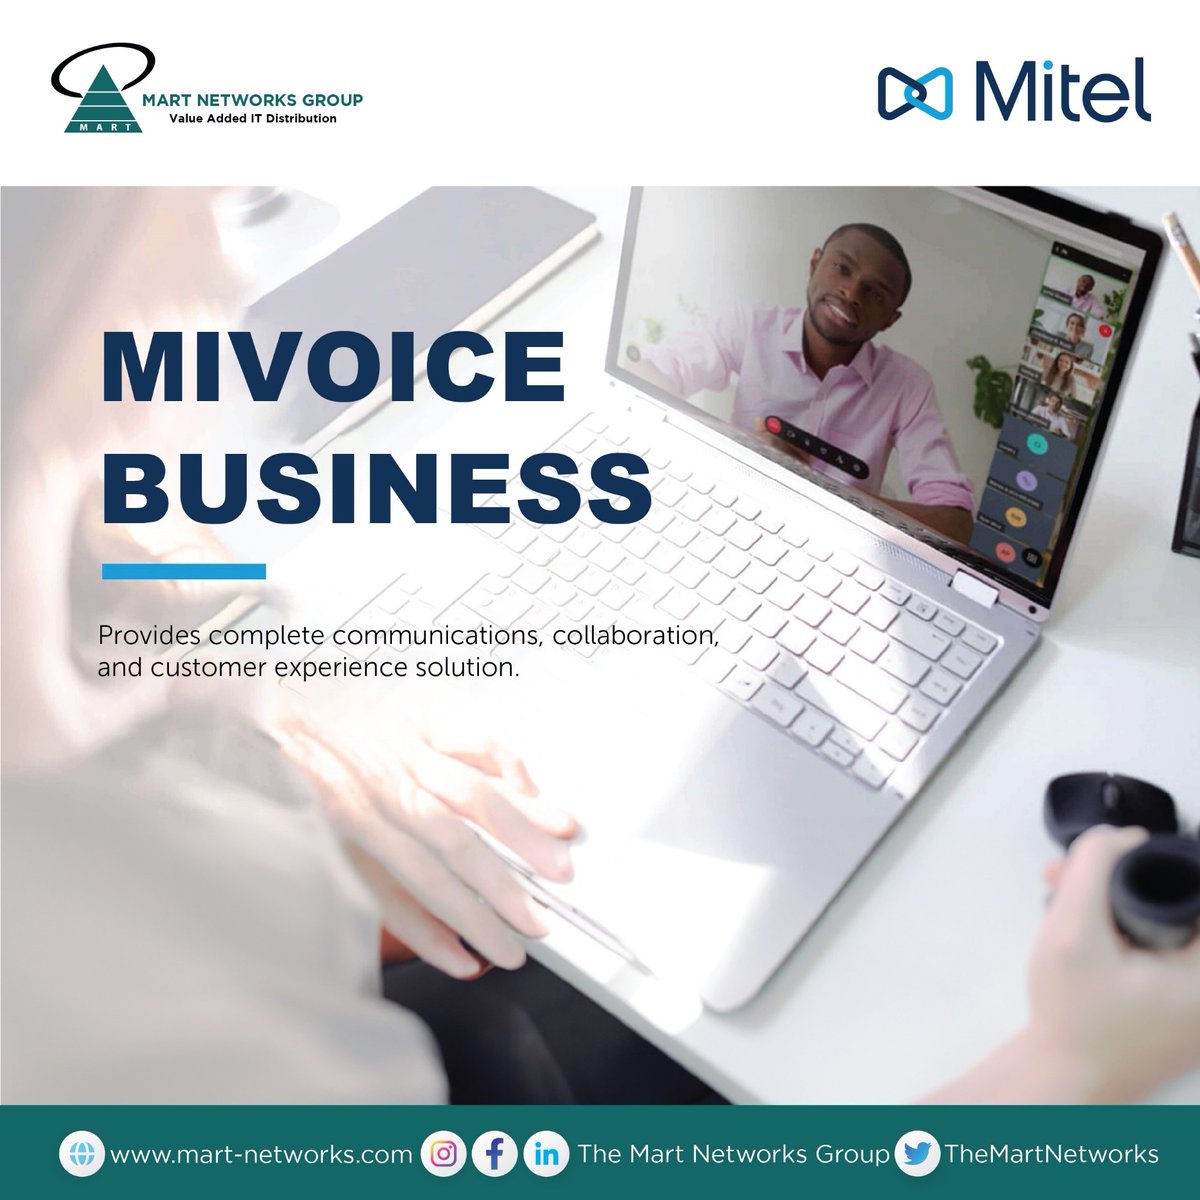 MIVOICE BUSINESS
 
Read More: lnkd.in/eeJRXrTm
 
Contact Us For More Inquires and Purchase: mart-networks.com/contact-us

#themartnetworkdistributiontanzanialtd #awardwinningdistributor #youronestopITdistributor #Mitel #MiVoice